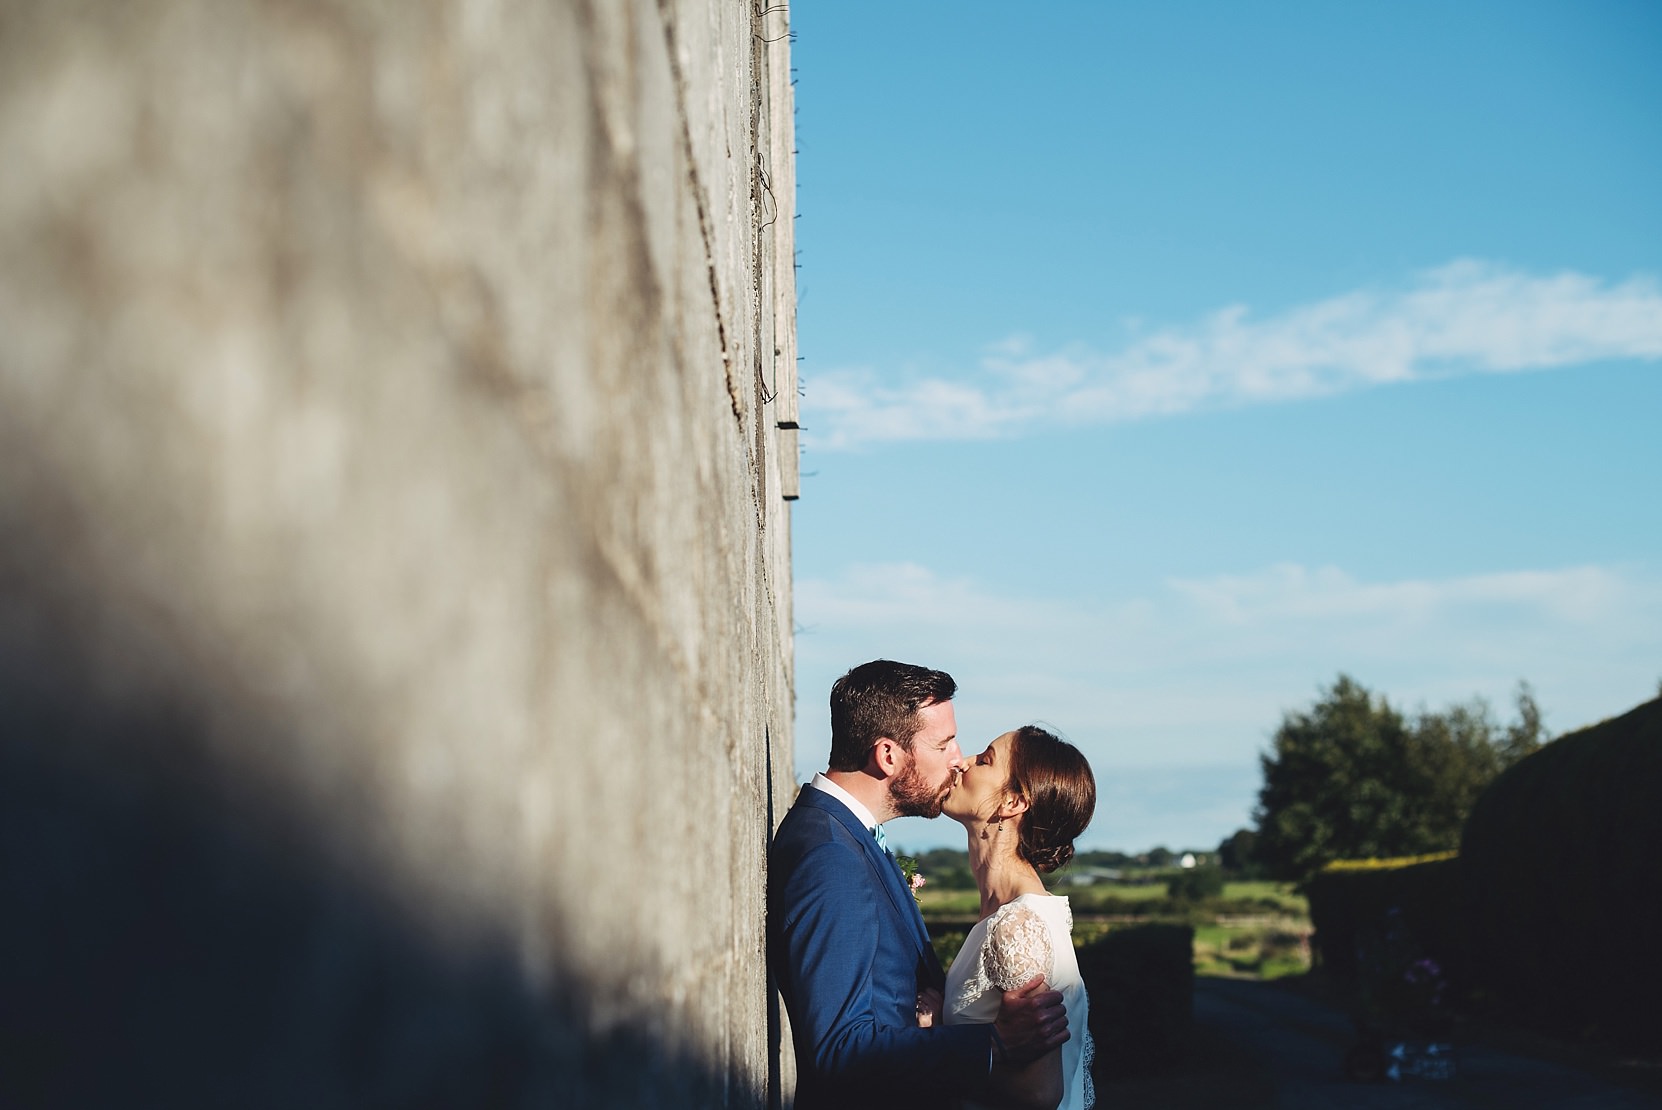 Bride and groom standing at a wall at a wedding in good light with the sky in the background